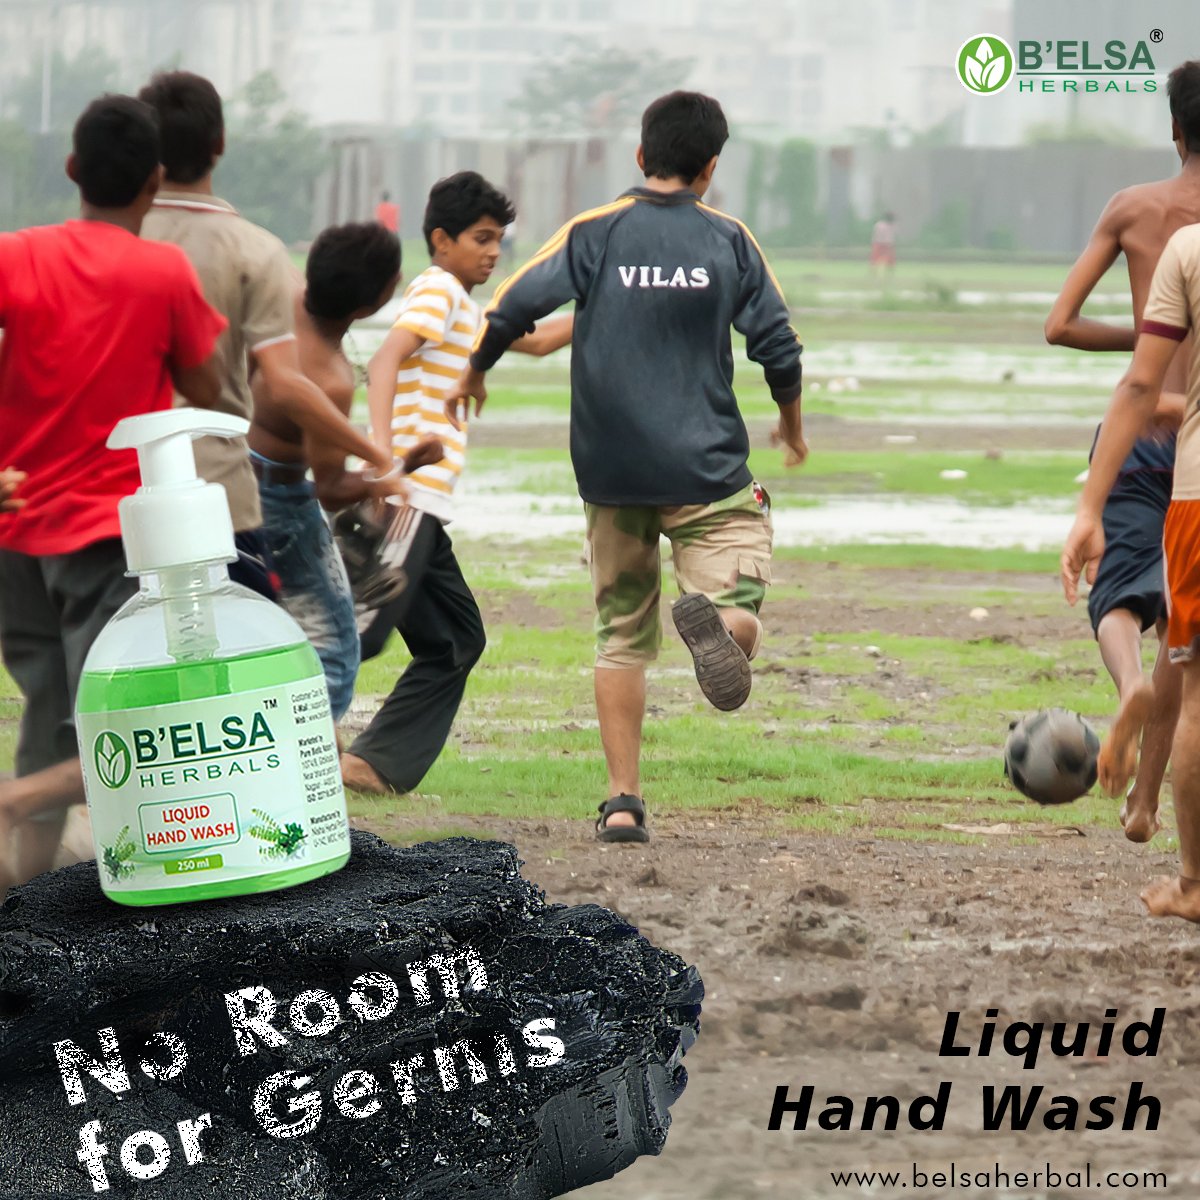 Let’s break-up with germs!
Your life is in your hands, wash them properly with Belsa Herbal Liquid Hand wash.

#handwash #wash #health #cleanhands  #handhygiene #stayhealthyandfit  #stayhealthy #skincare  #handsoap #washyourhands #liquidhandwash #belsa #herbal #cosmetics